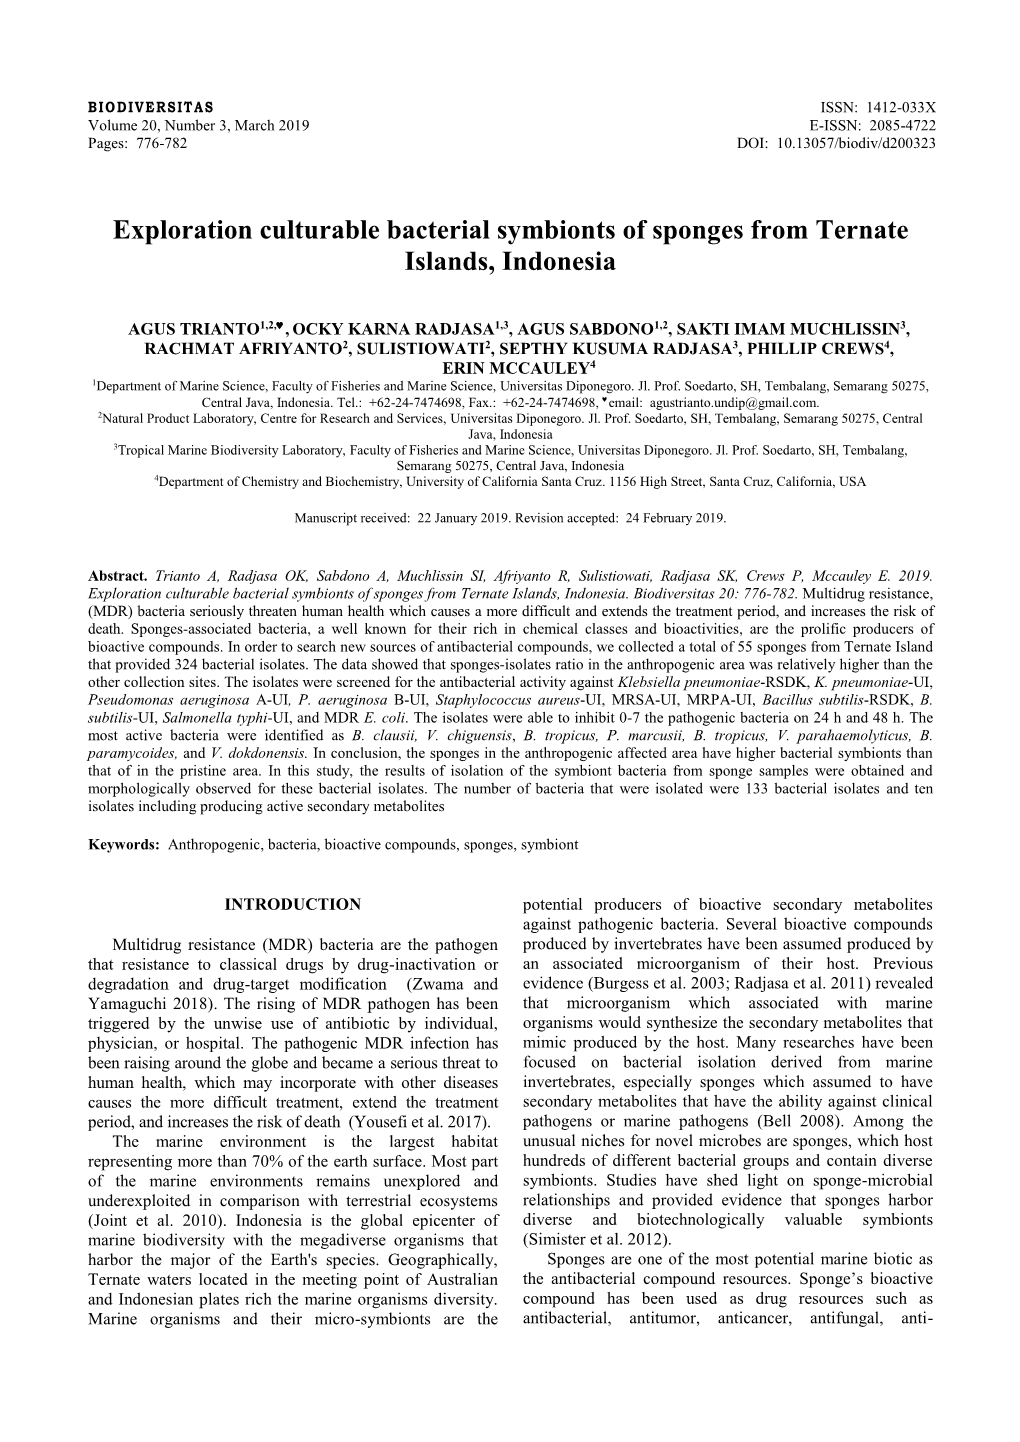 Exploration Culturable Bacterial Symbionts of Sponges from Ternate Islands, Indonesia